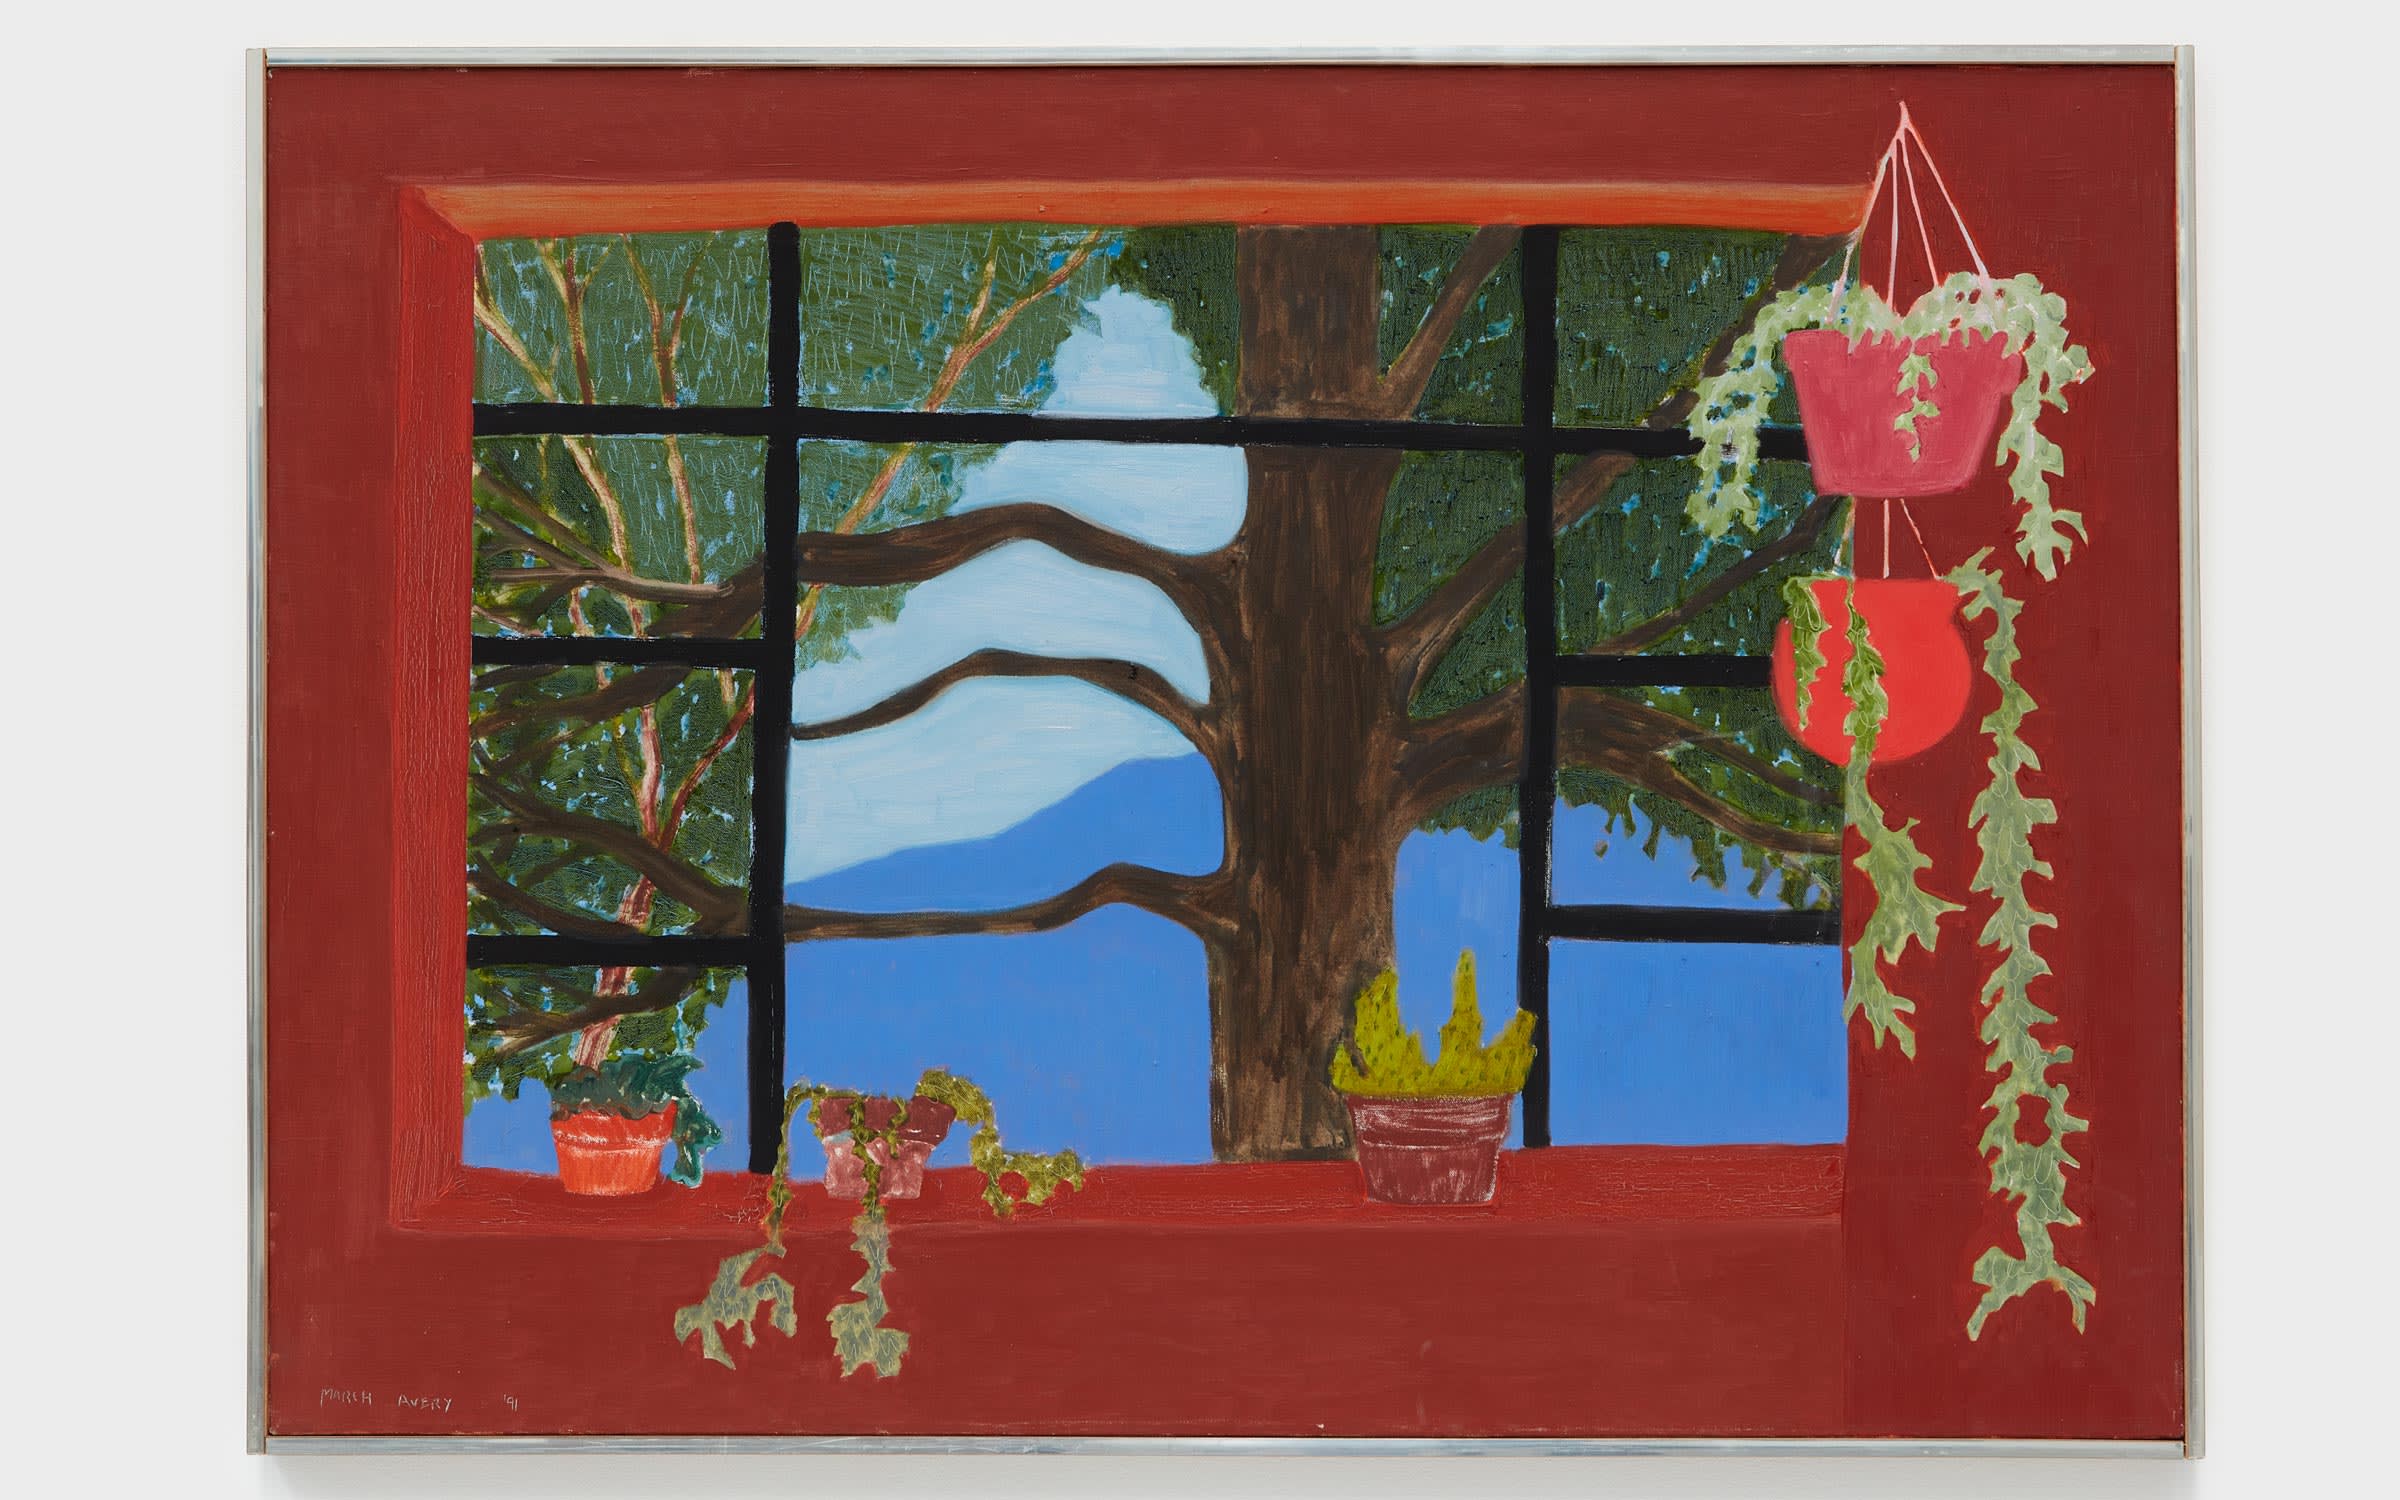 March Avery, Bearsville Window, 1991. © March Avery. Courtesy of the artist and Blum & Poe, Los Angeles/New York/Tokyo.